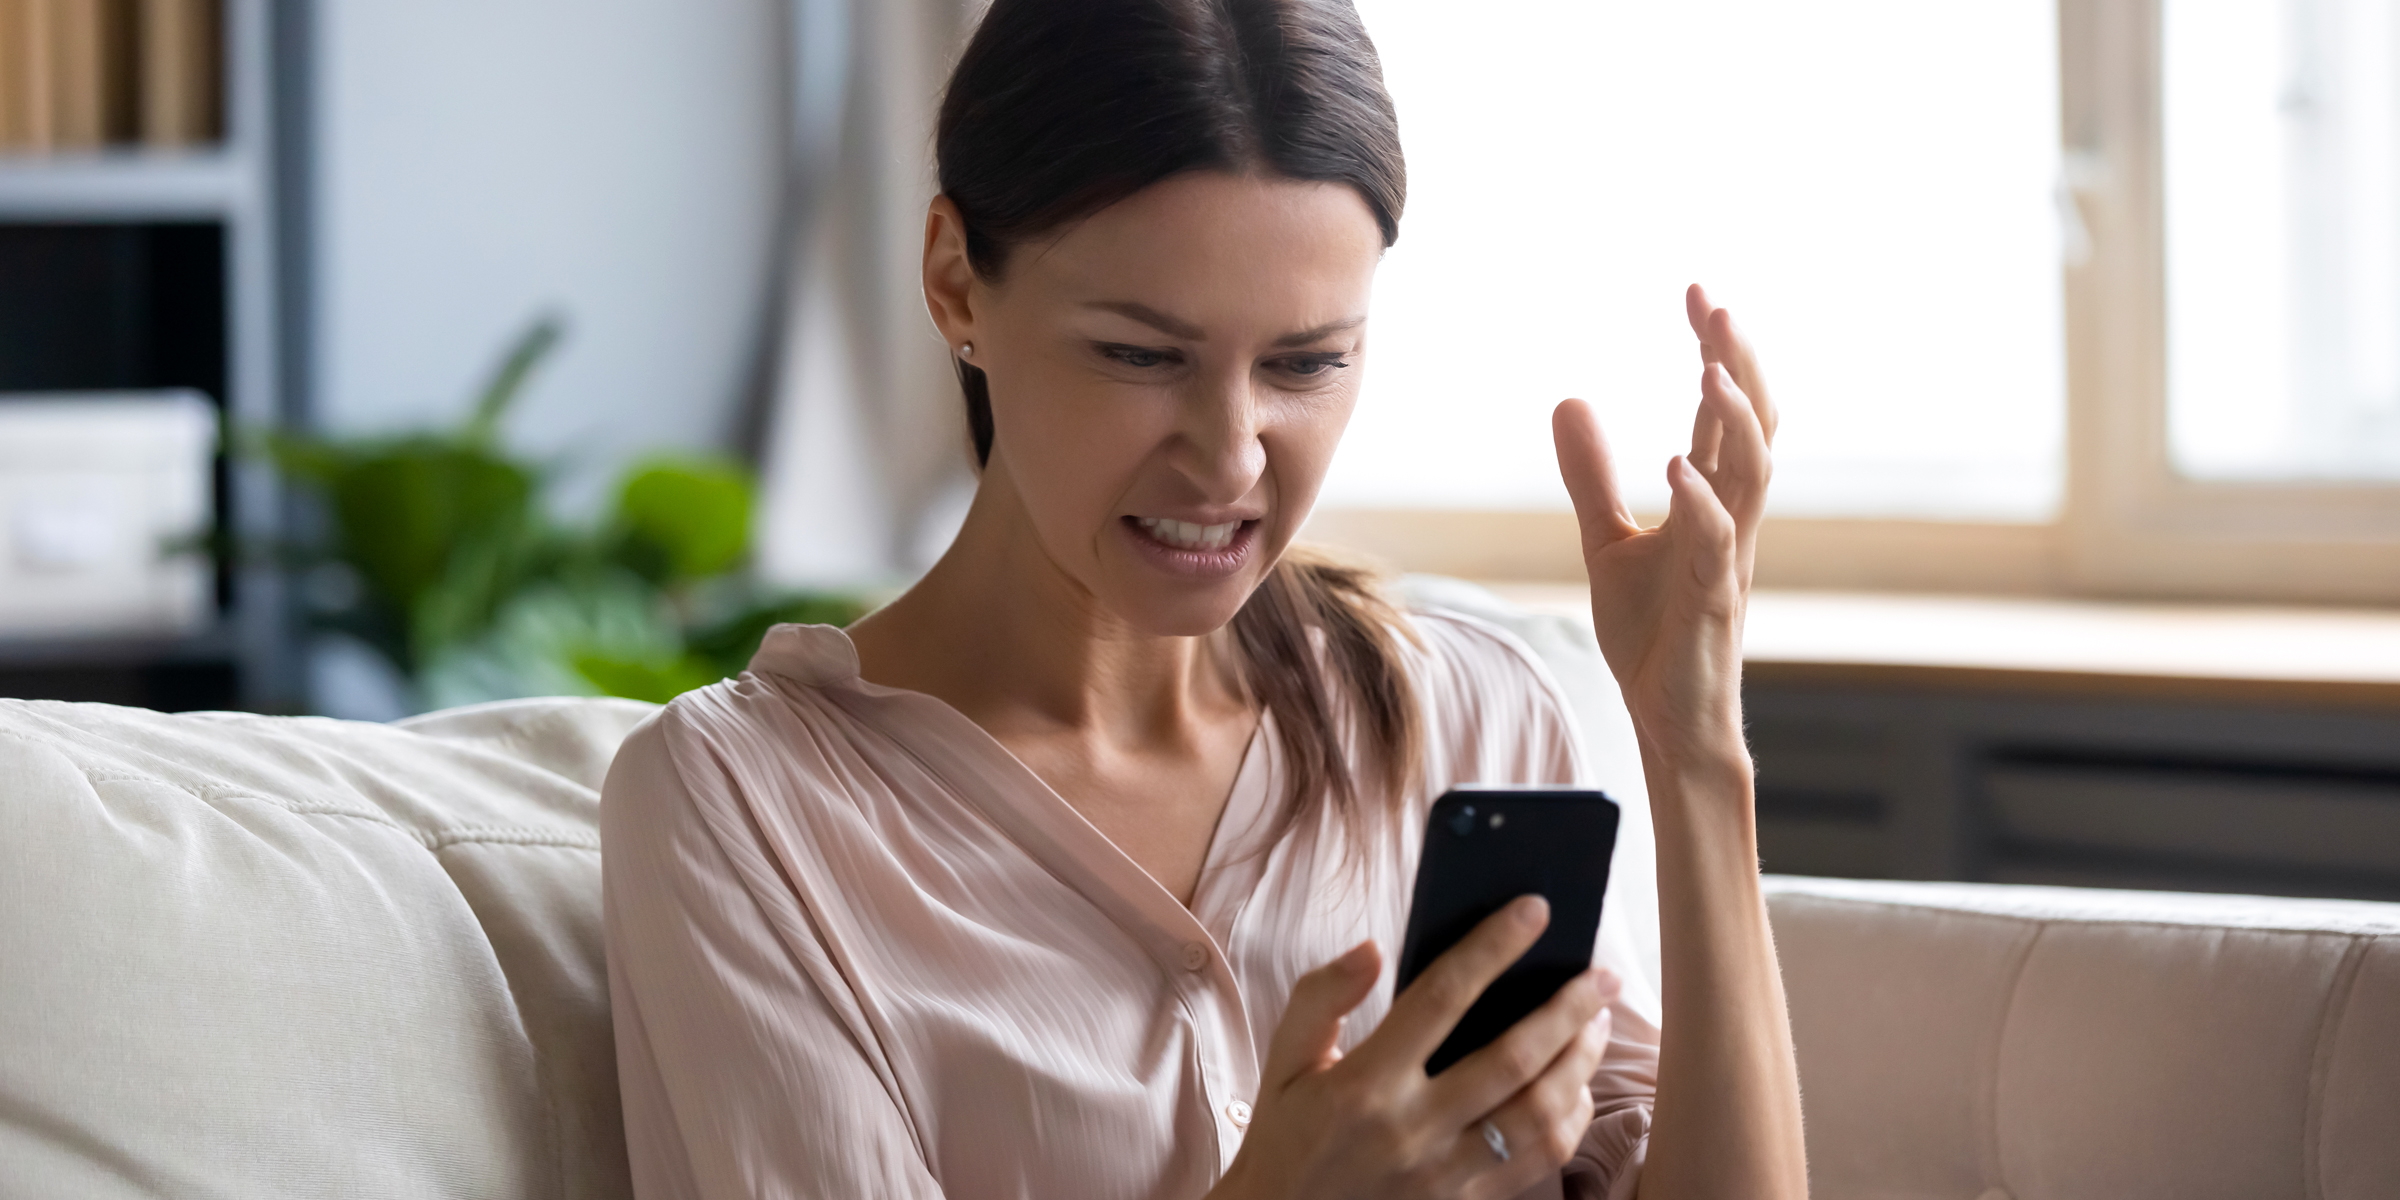 Angry woman with a smartphone | Source: Shutterstock